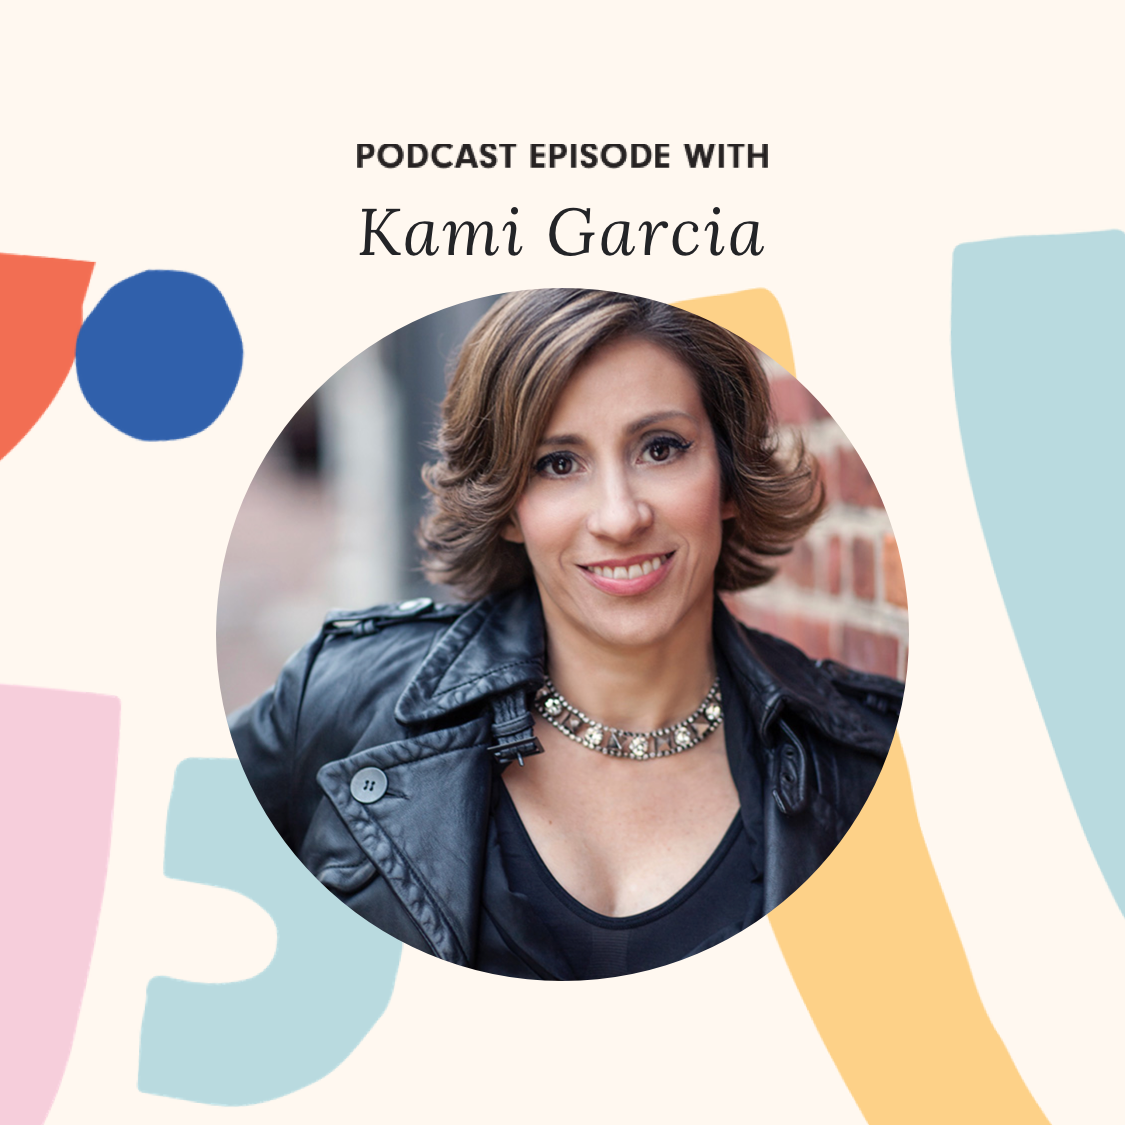 Kami Garcia on Accurately Portraying Characters by Writing What You